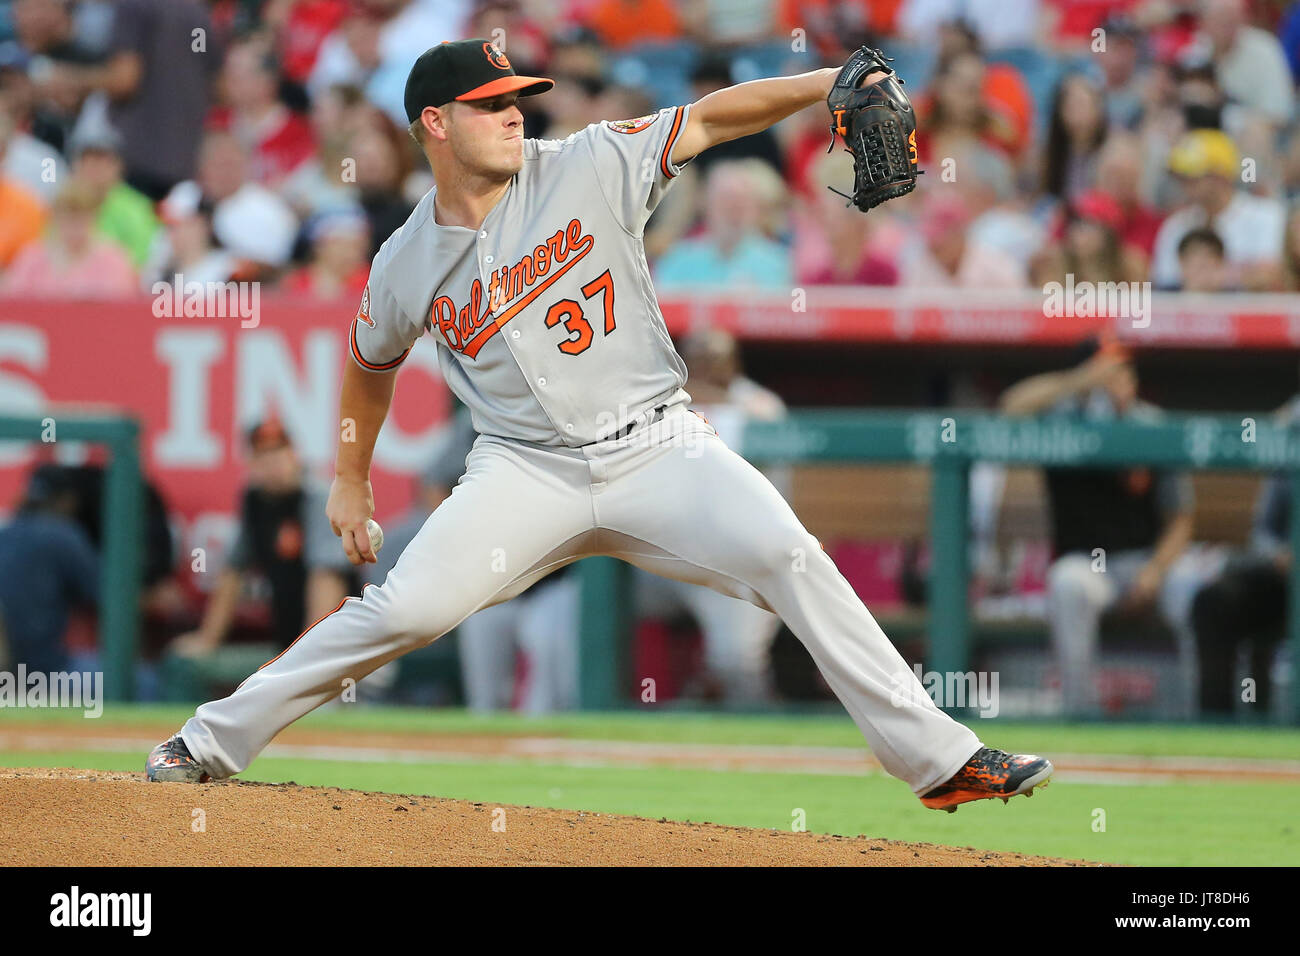 Anaheim, California, USA. 07th Aug, 2017. August 7, 2017: Baltimore Orioles starting pitcher Dylan Bundy (37) makes the start for the Orioles in the game between the Baltimore Orioles and Los Angeles Angels of Anaheim, Angel Stadium in Anaheim, CA, Photographer: Peter Joneleit Credit: Cal Sport Media/Alamy Live News Stock Photo